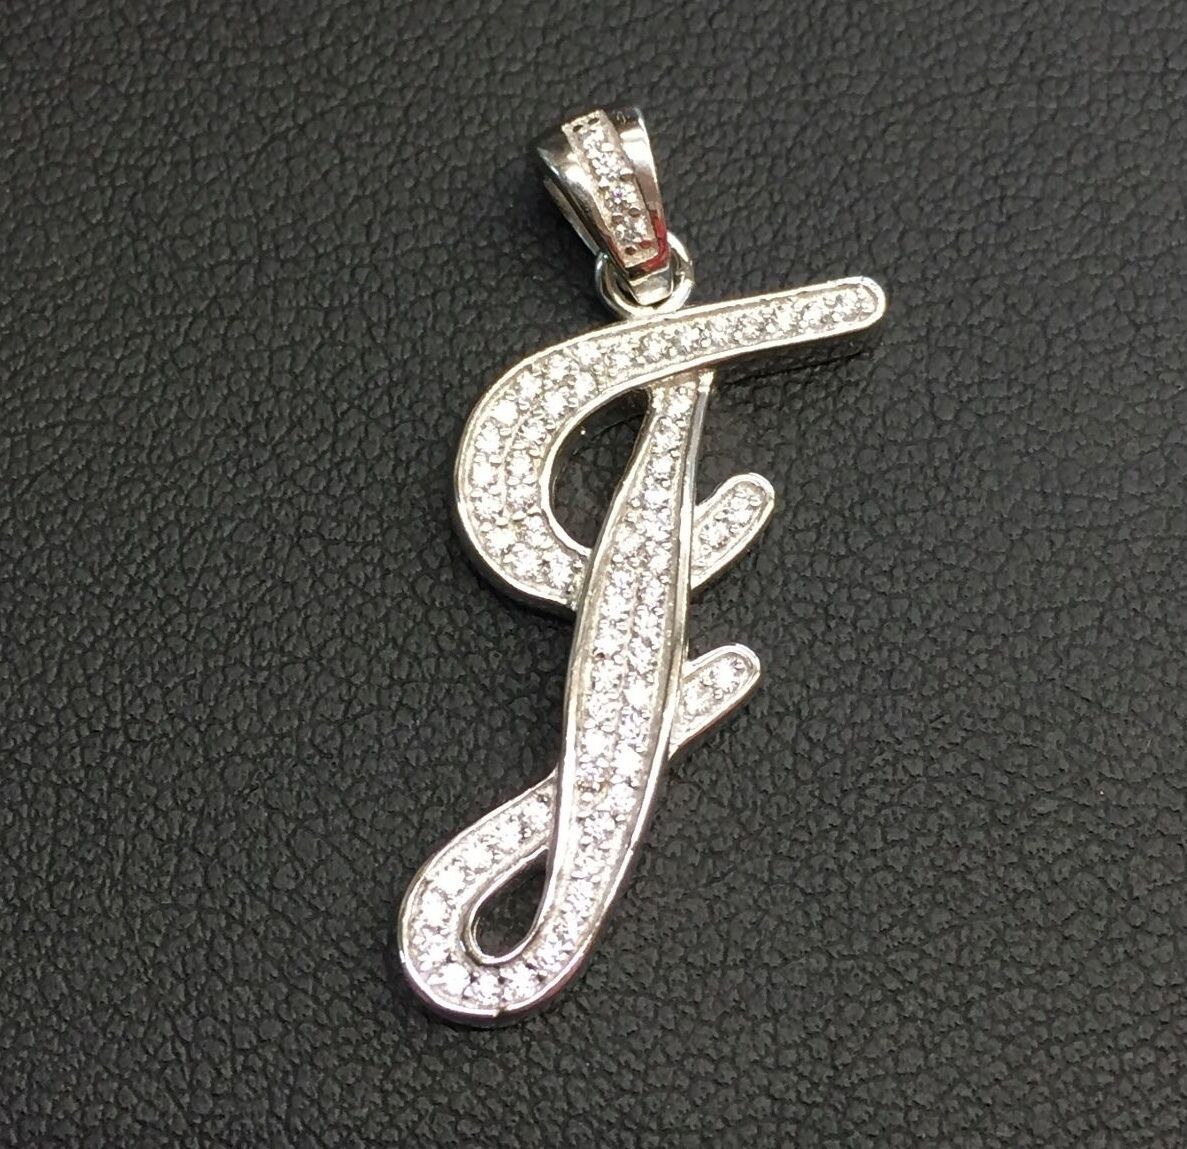 NEW!! 925 Sterling Silver CZ Letter Initial "I" Pendant Necklace - $24.70